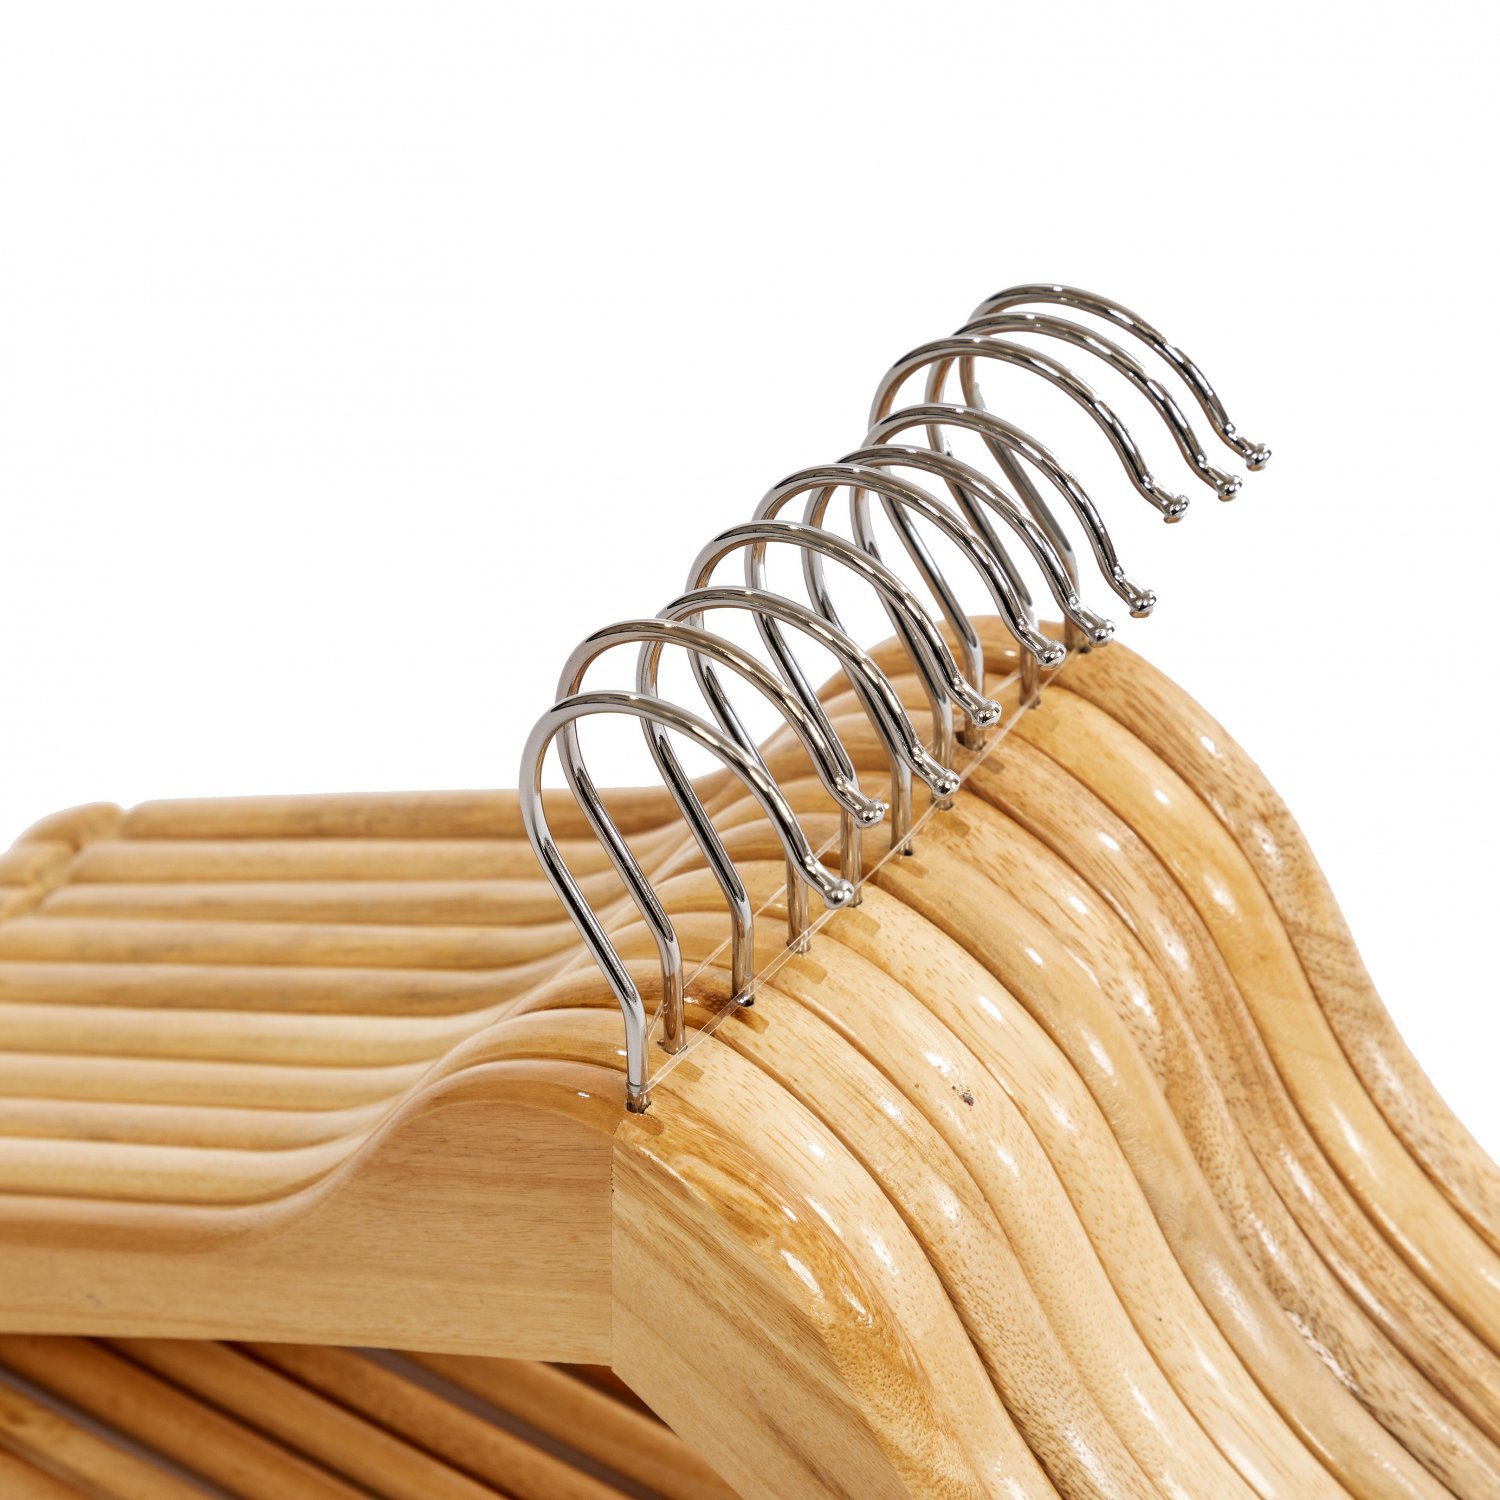 Pack of 20 Pack of 20High Quality Wooden Wood Clothes Hangers with Round Trouser Bar and Shoulder Notches for Loops 